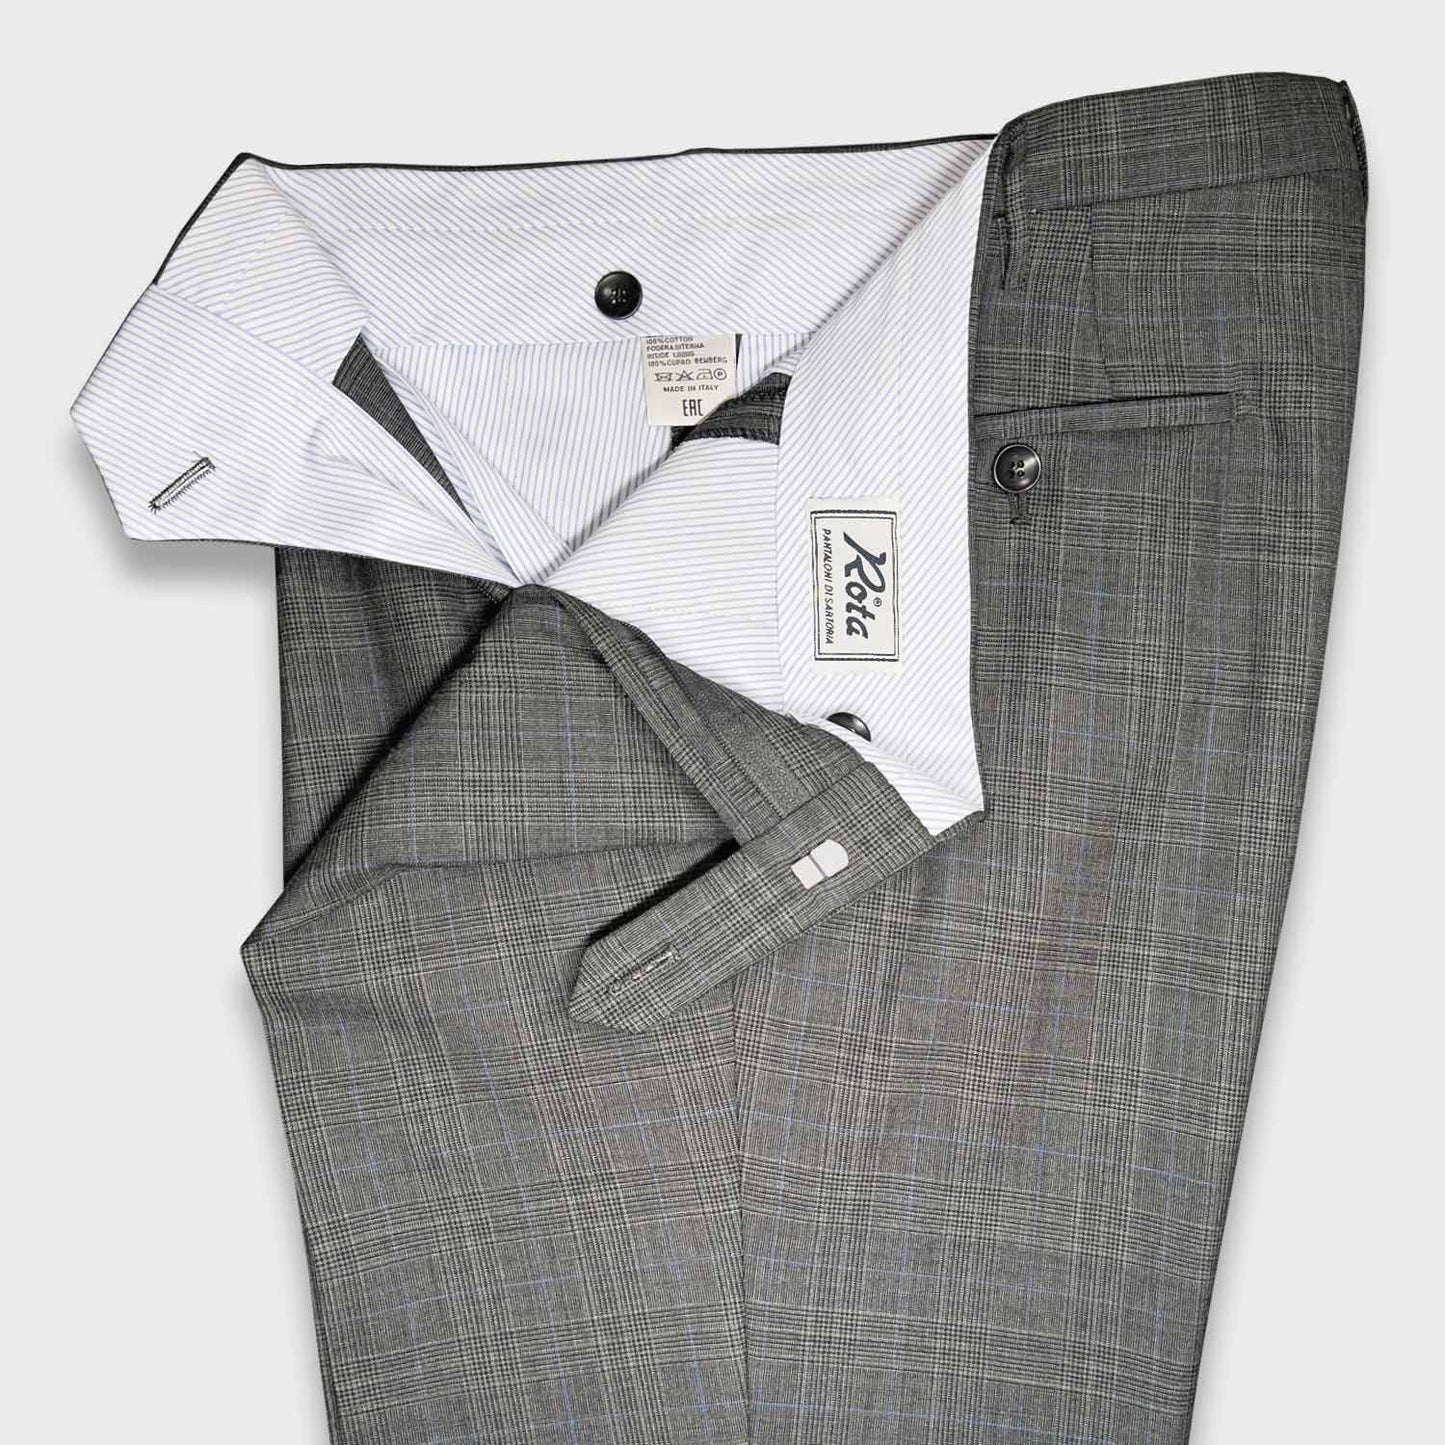 Smoke Grey Rota Prince of Wales Wool Trousers Double Pleats. Rota tailored wool trousers, made with extrafine virgin wool ideal for a to be used in spring summer, high rise classic fit, double pleats, Prince of Wales smoke grey color with light blue and sand beige thin windowpane pattern